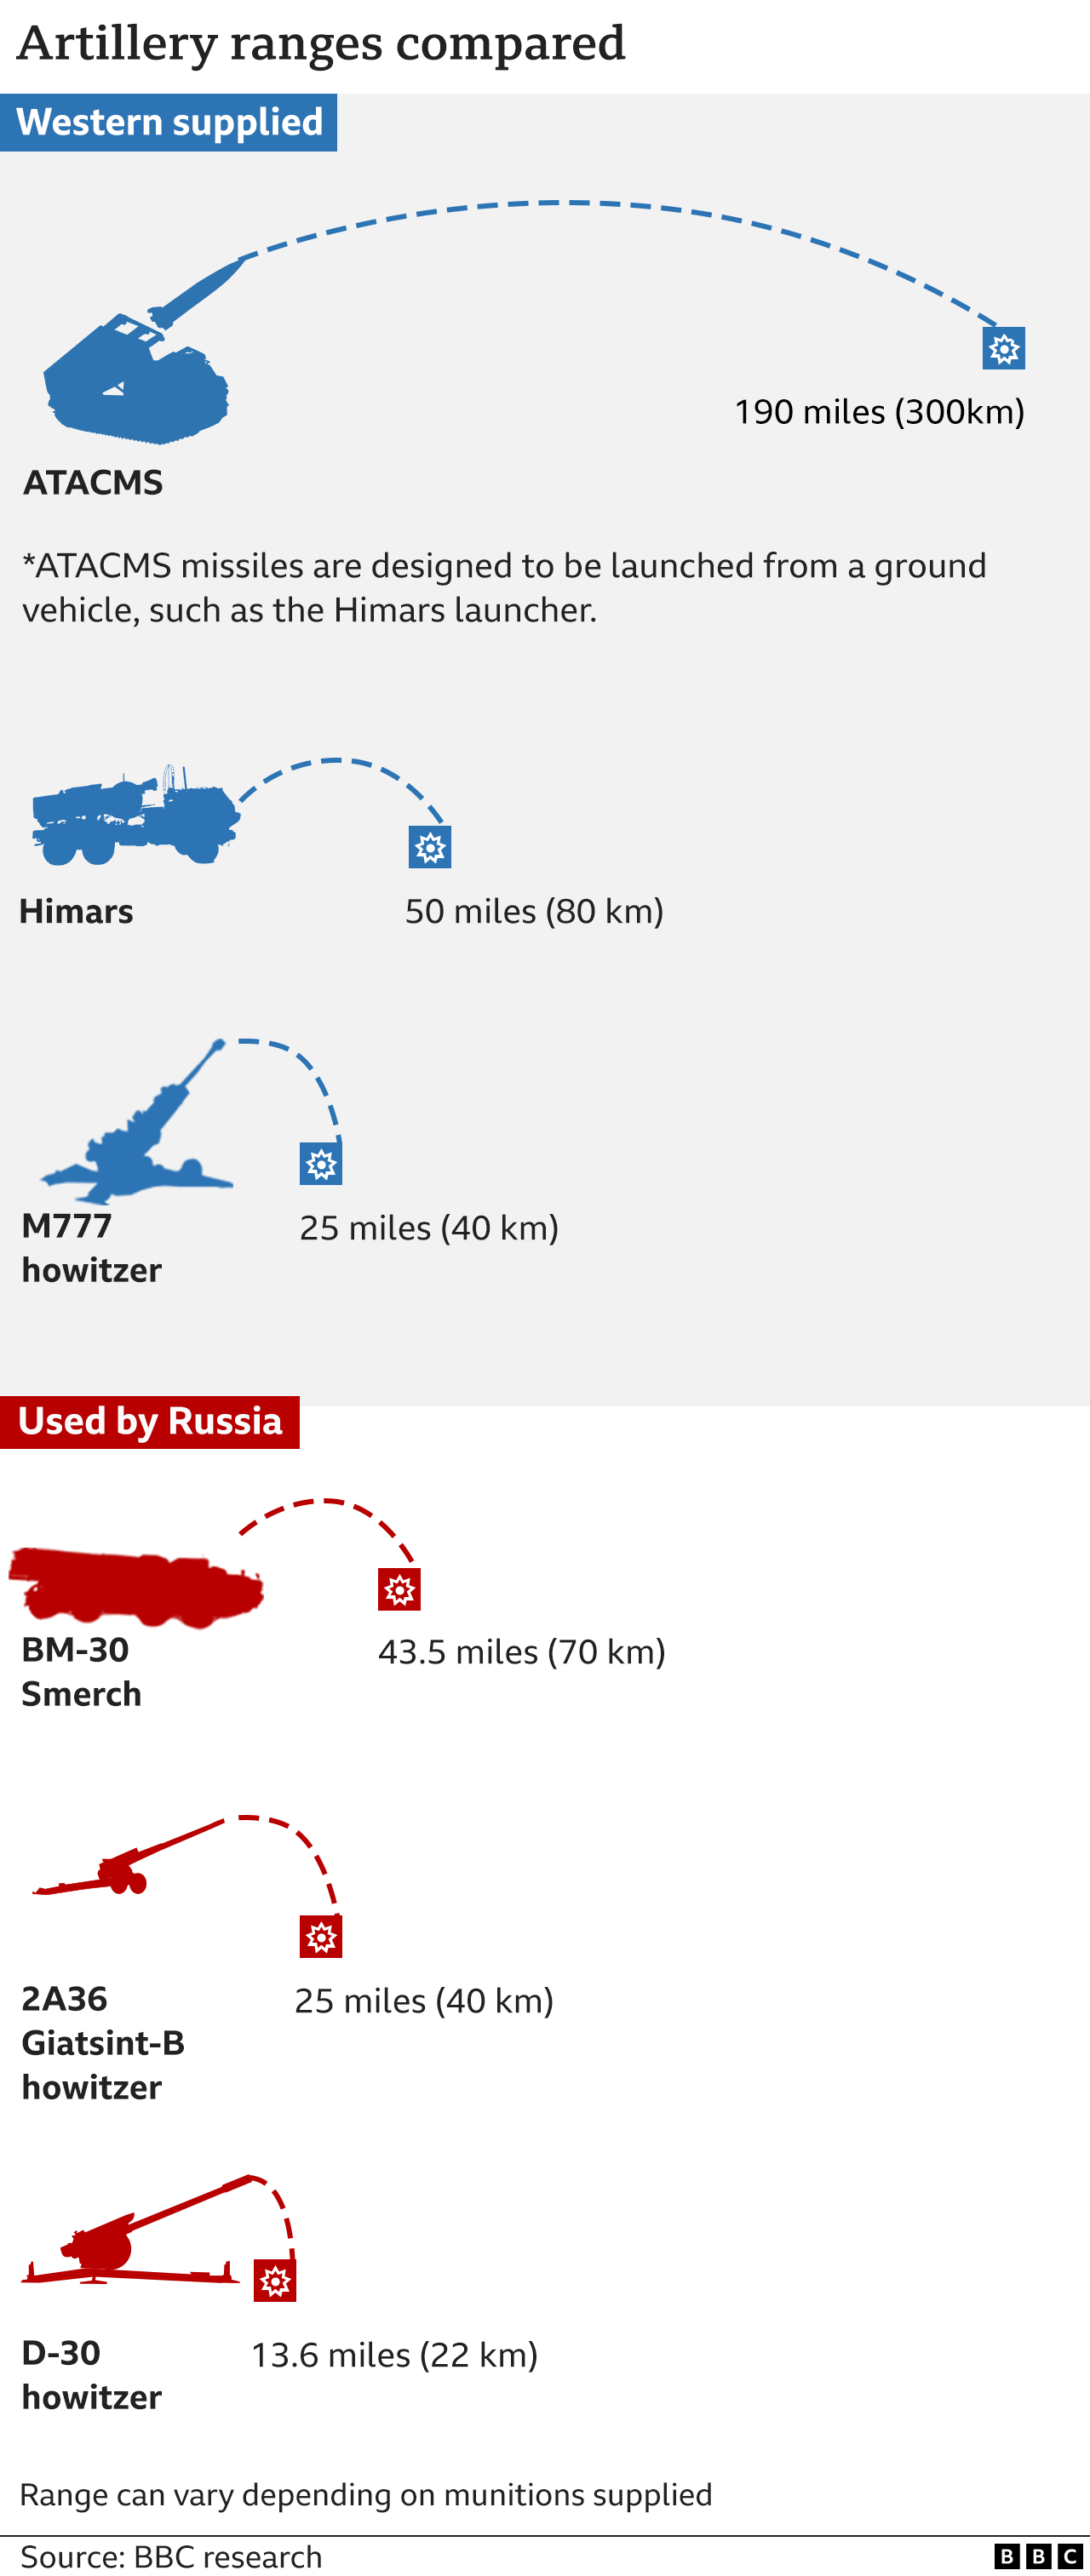 A BBC graphic compares the ranges of different artillery systems. Western-supplied systems shown are ATACMS (190 miles; 300km), Himars (50 miles); M777 howitzer (25 miles). Systems used by Russia shown are HM-30 Smerch (43.5 miles), 2A36 (25 miles), D-30 howitzer (13.6 miles)